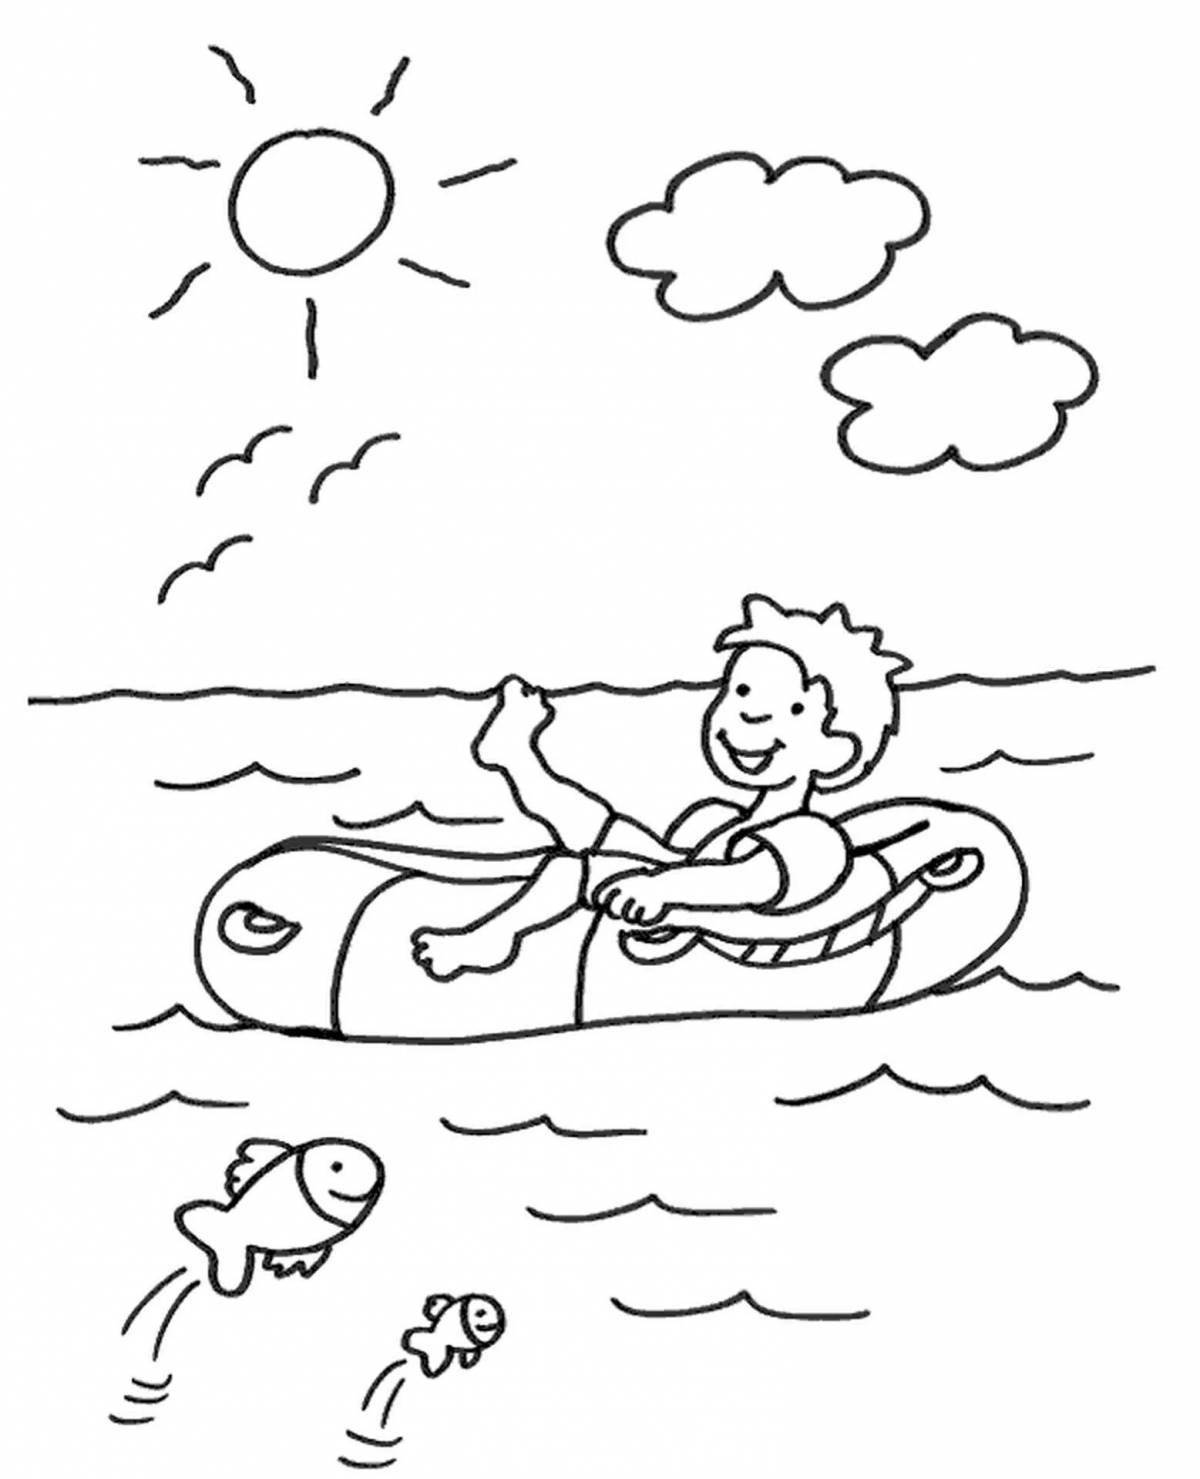 Innovative water safety coloring page